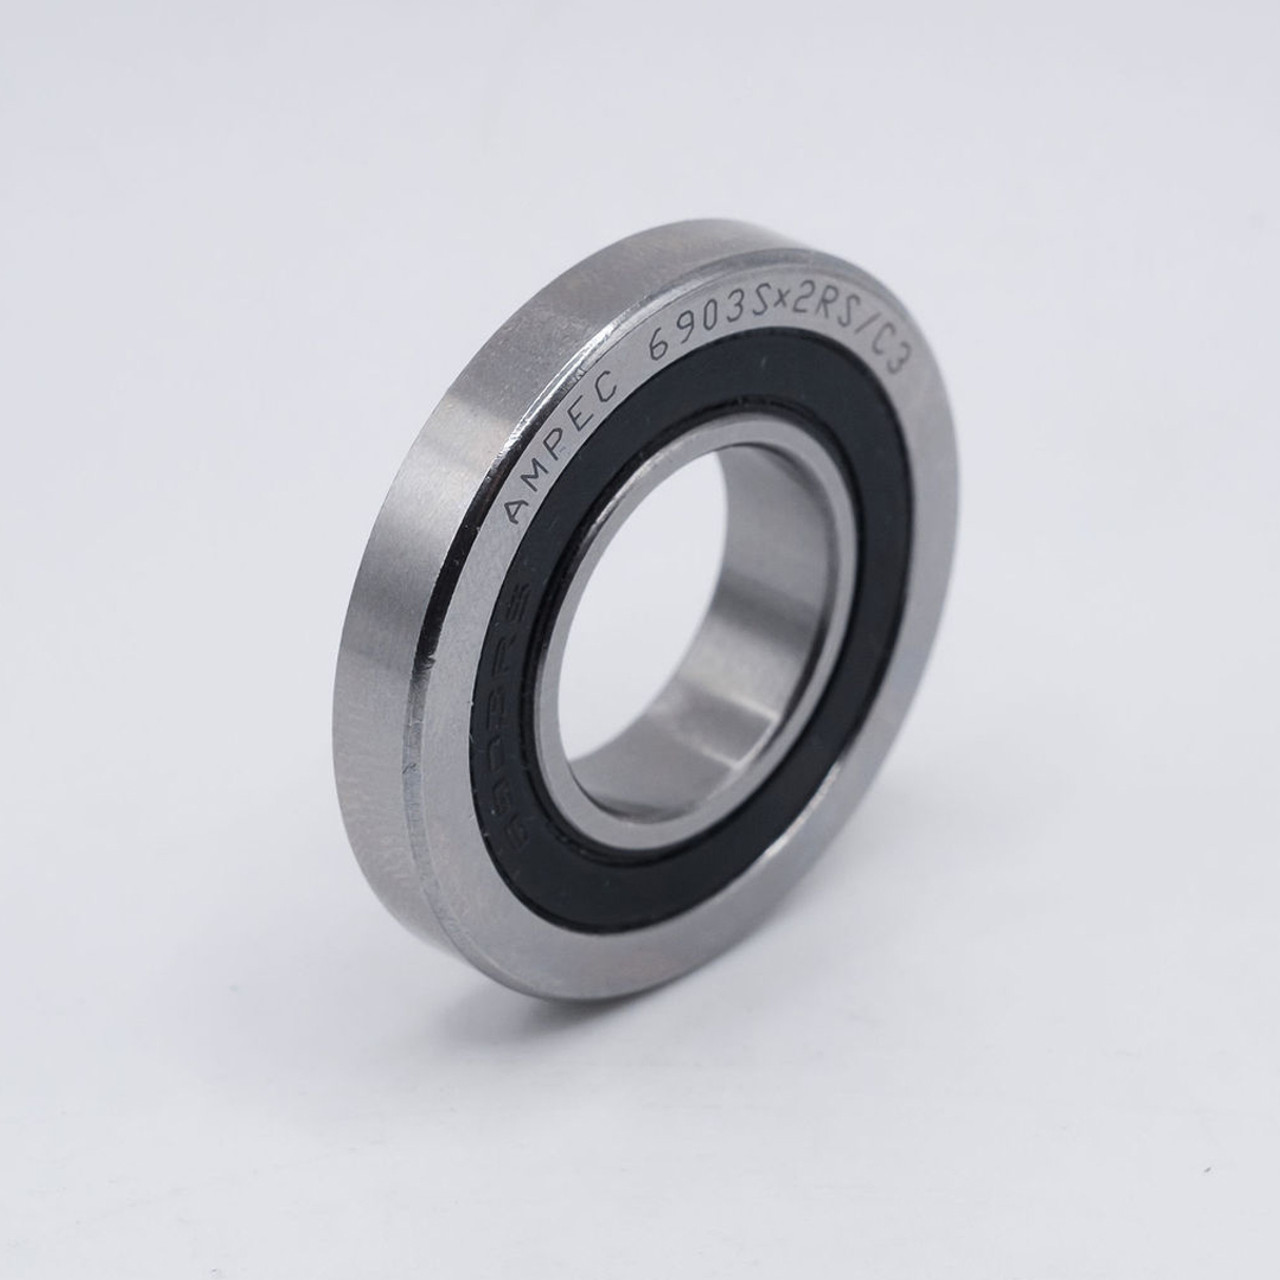 SX0389LUACS25 Ball Bearing 17x35x7mm Front Left Angled View